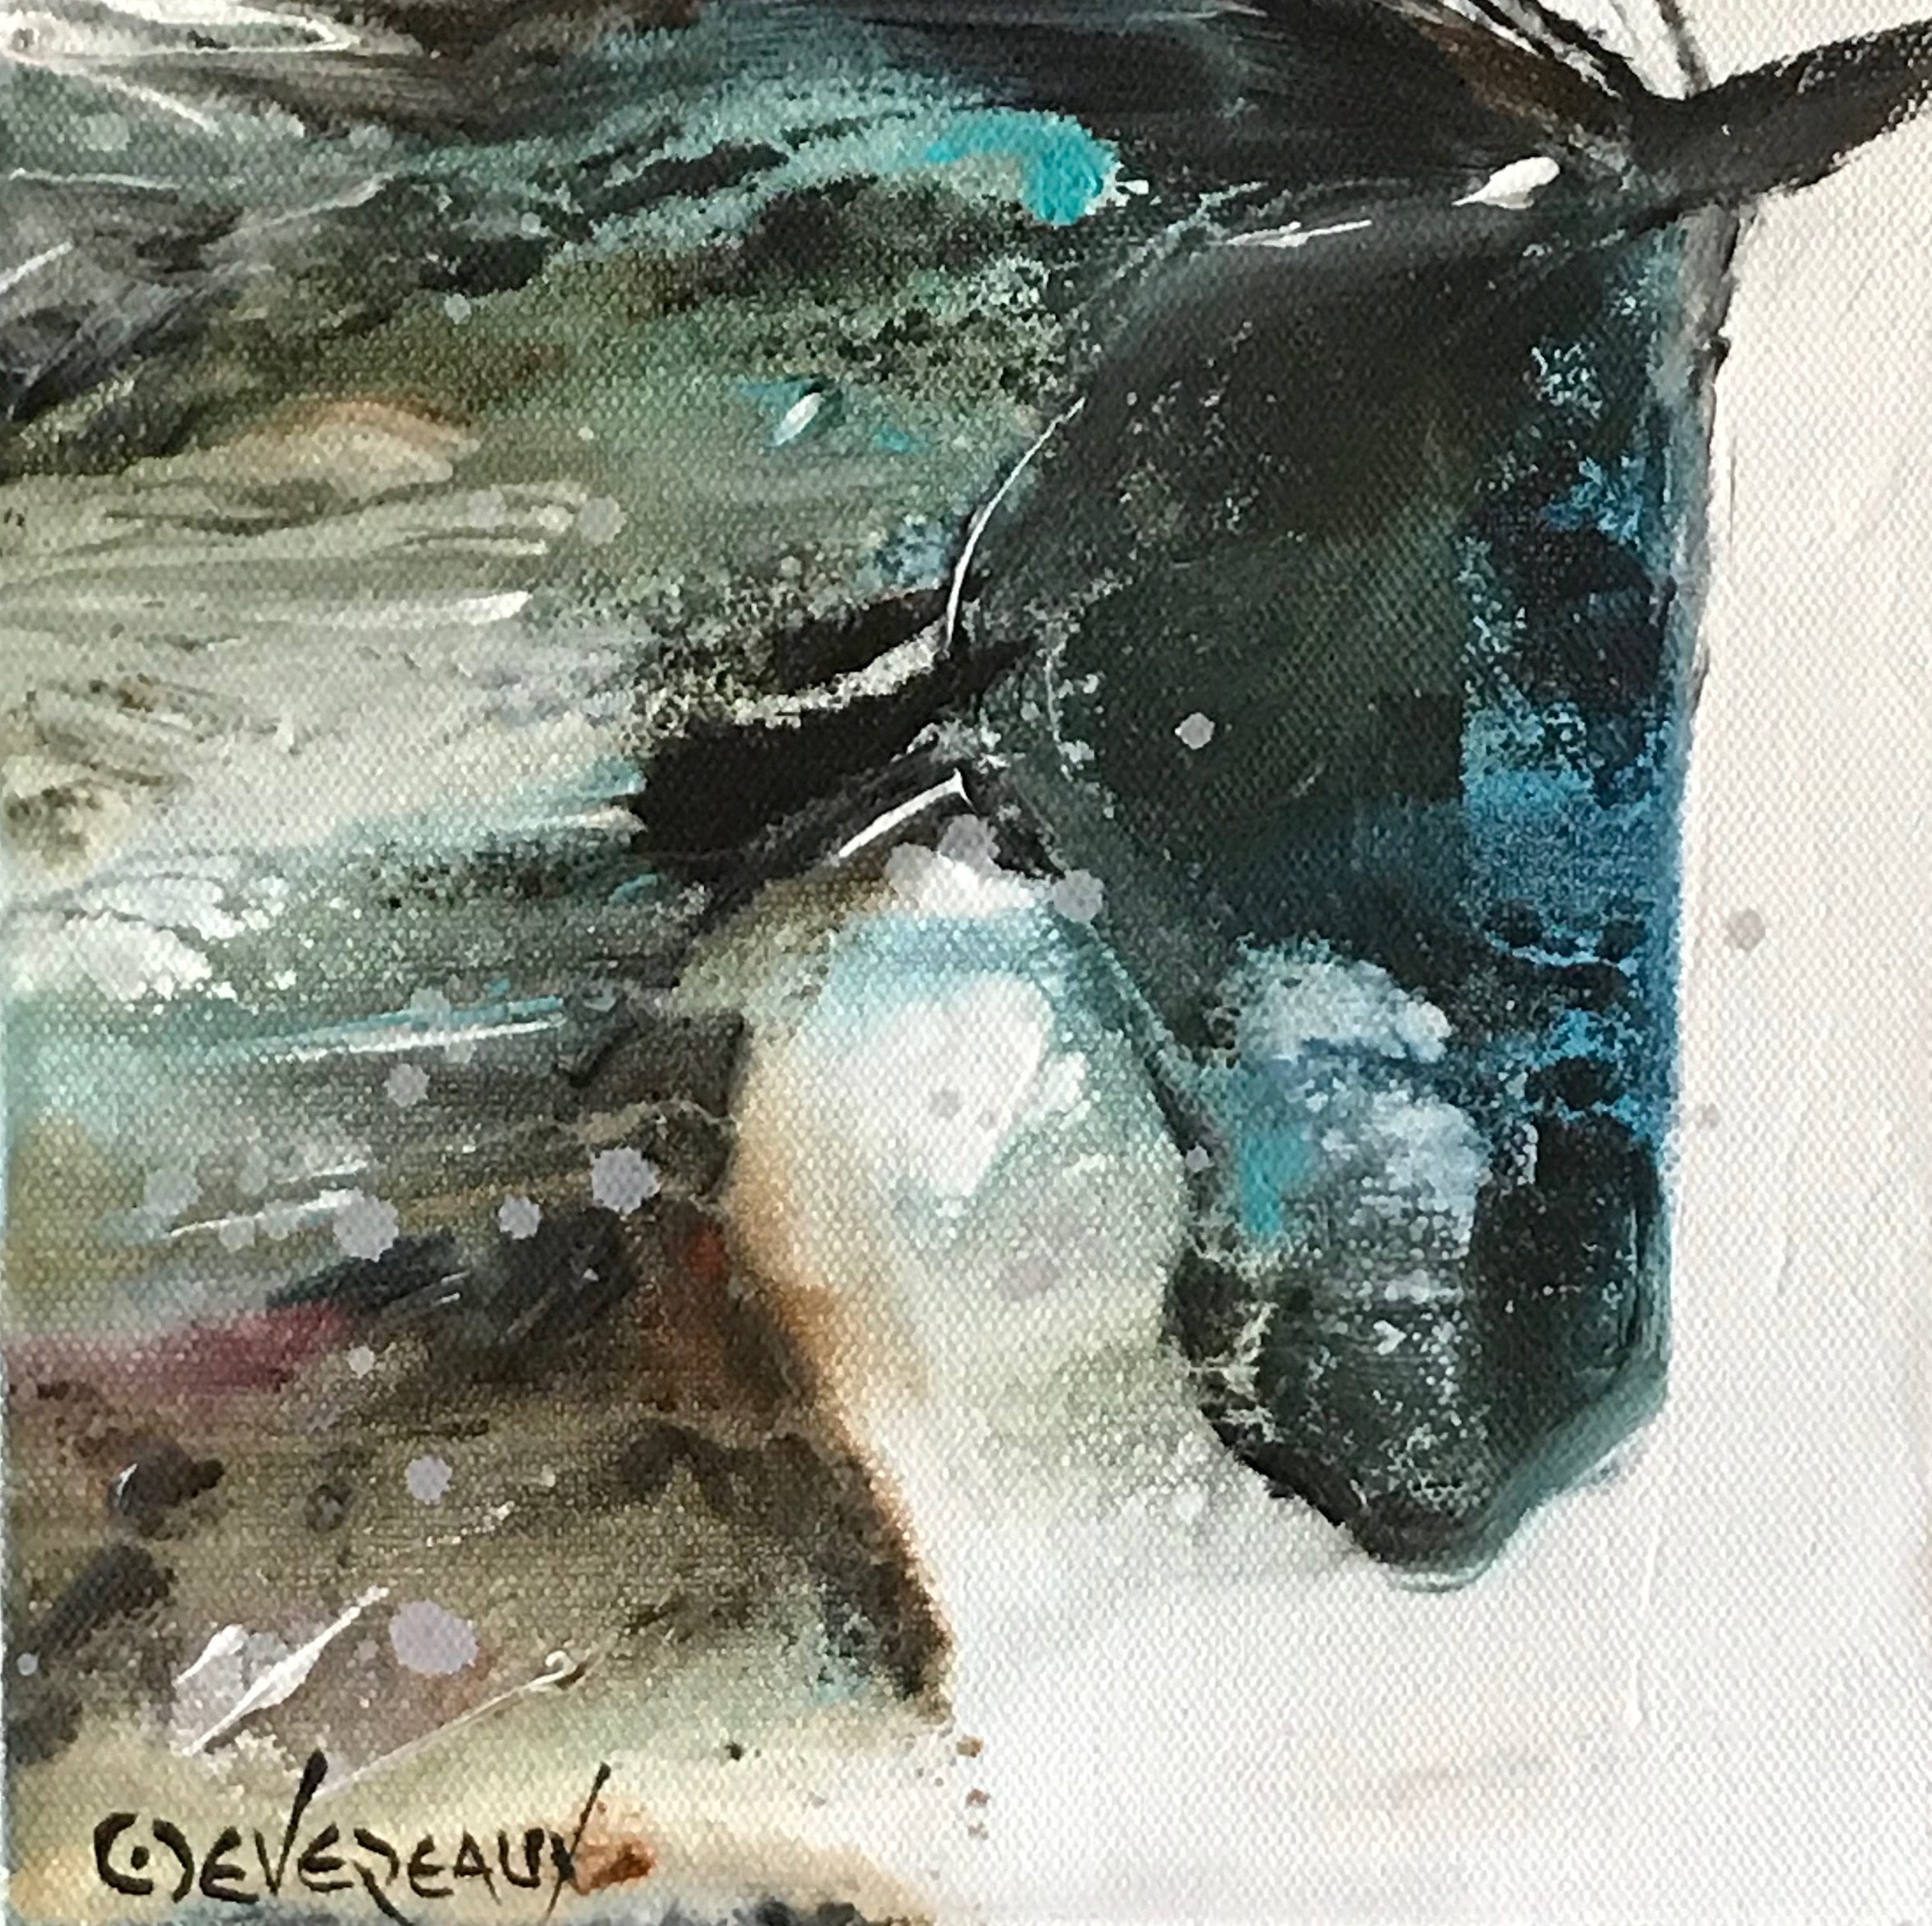 'Small 102' 8x8 Contemporary Modern Equine Horse Painting by Cher Devereaux on stretched canvas